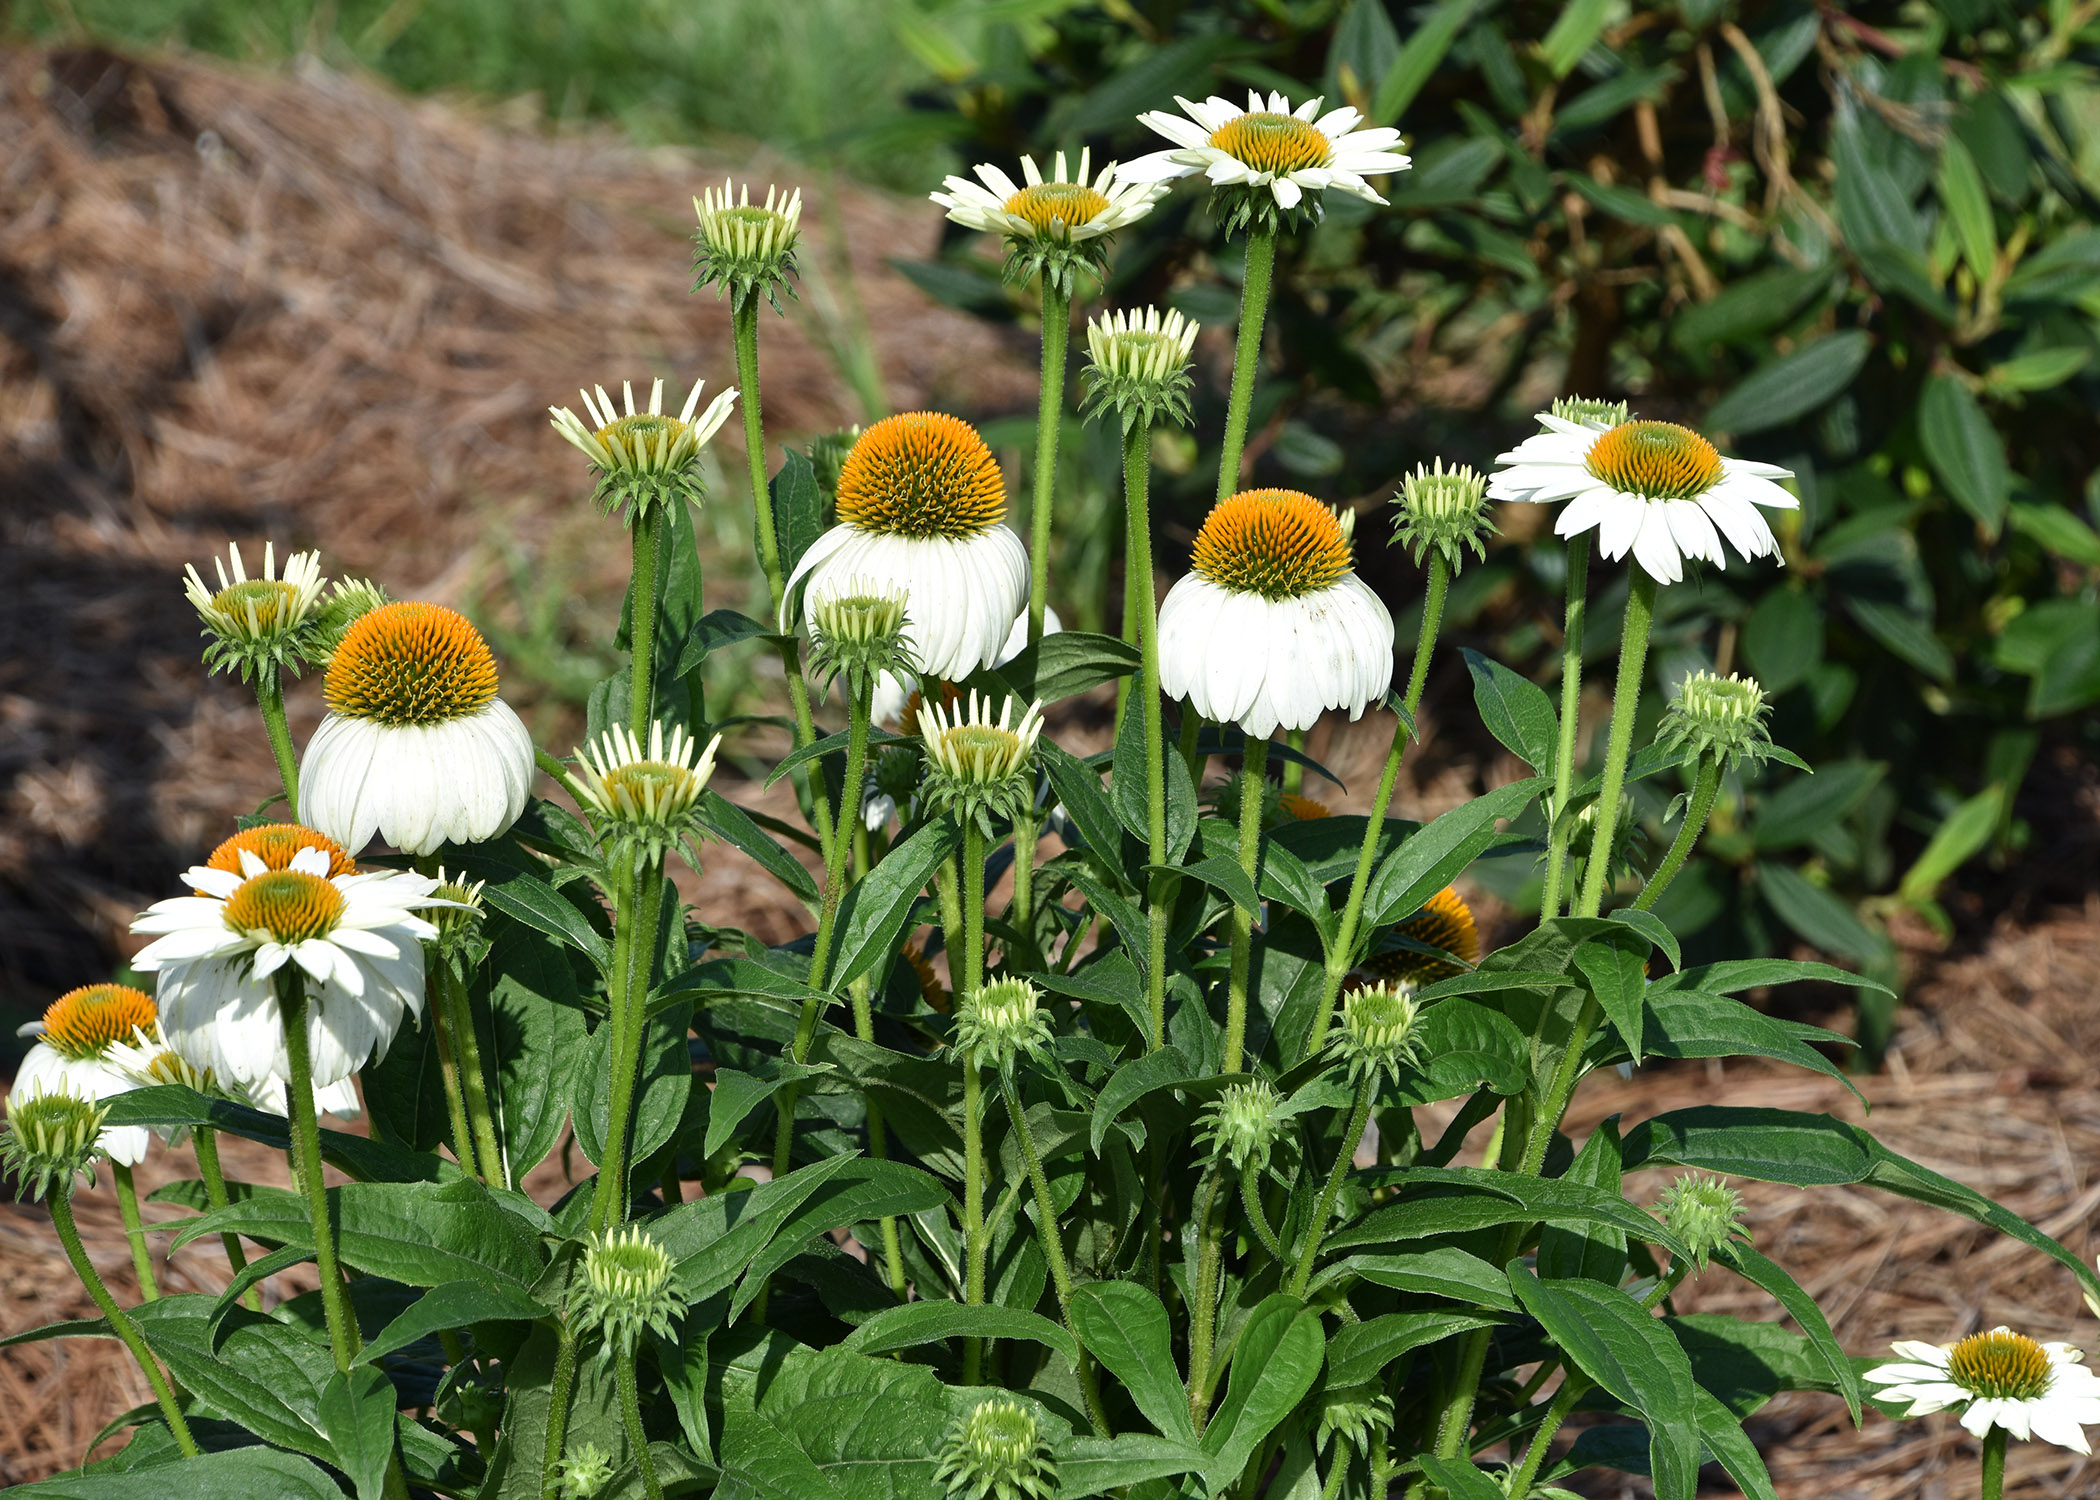 White Swan derives from an Echinacea Bravado seedling that produced white flowers. It is often paired with Bravado as a landscape combination. (Photo by Gary Bachman/MSU Extension Service)